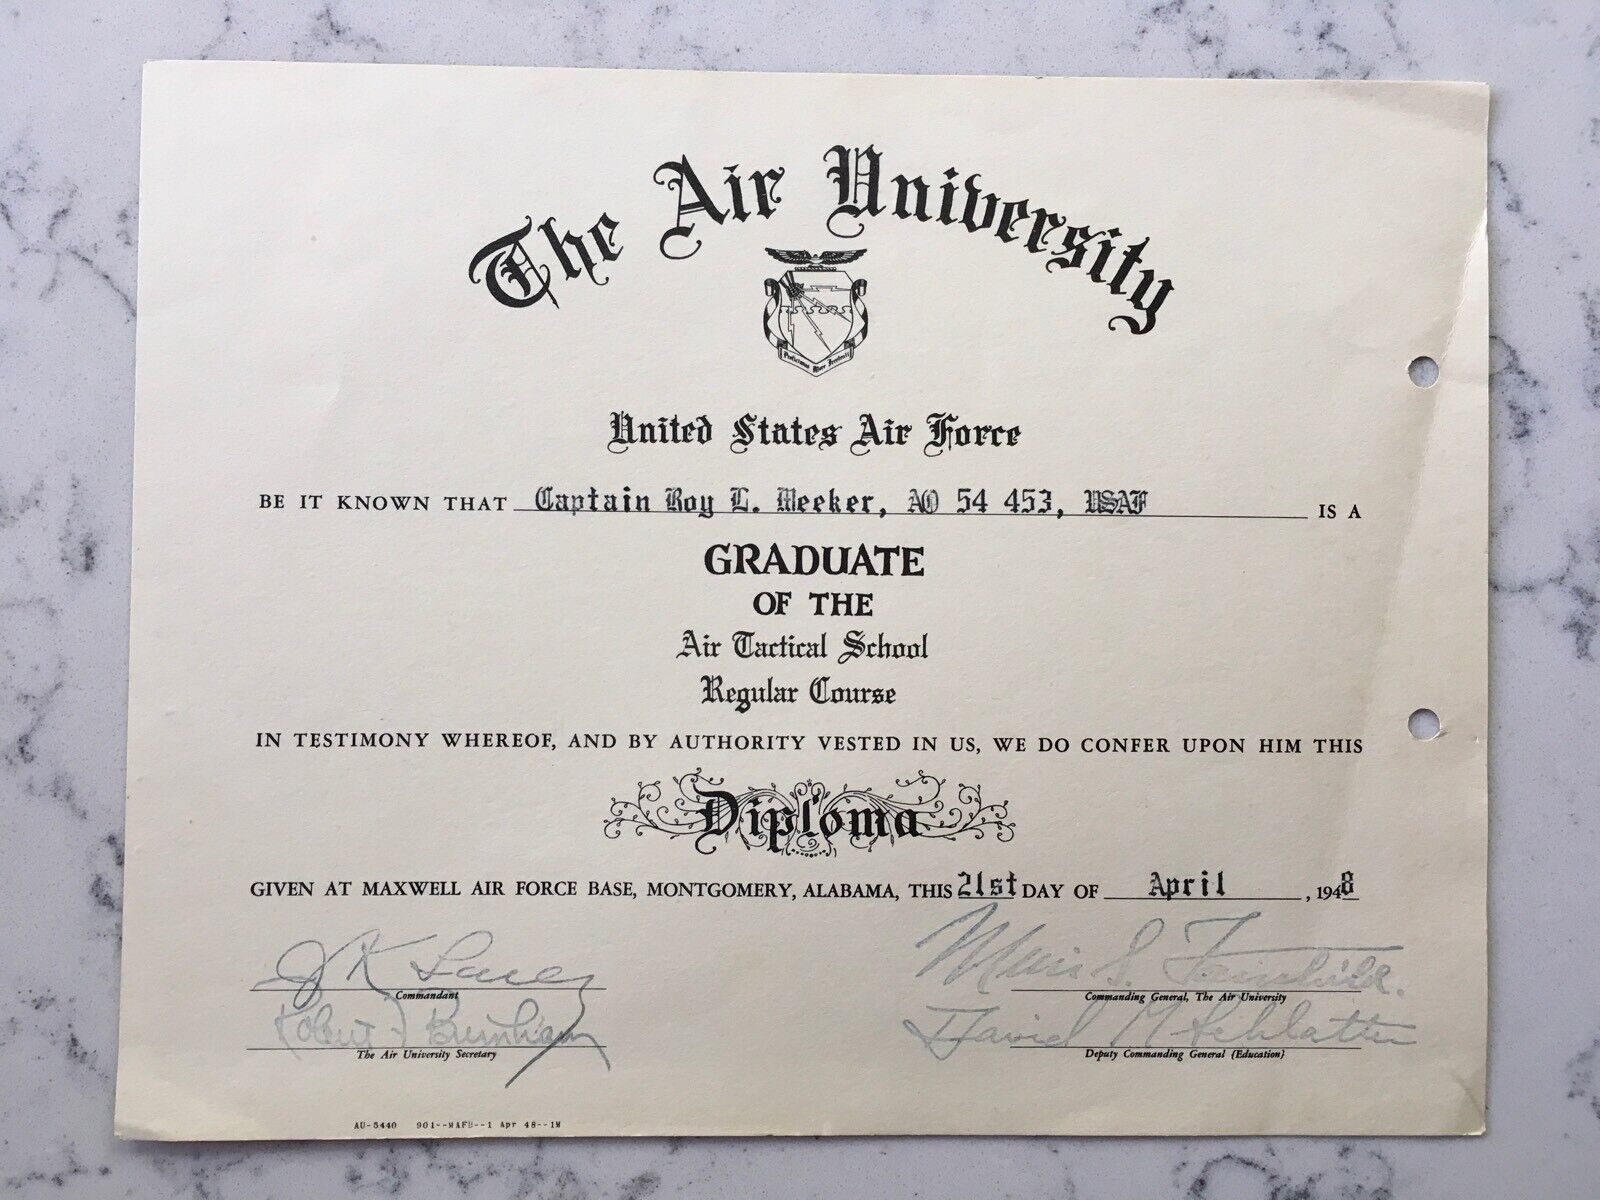 POST WW2 UNITED STATES AIR FORCE AIR UNIVERSITY AIR TACTICAL SCHOOL DIPLOMA 1948